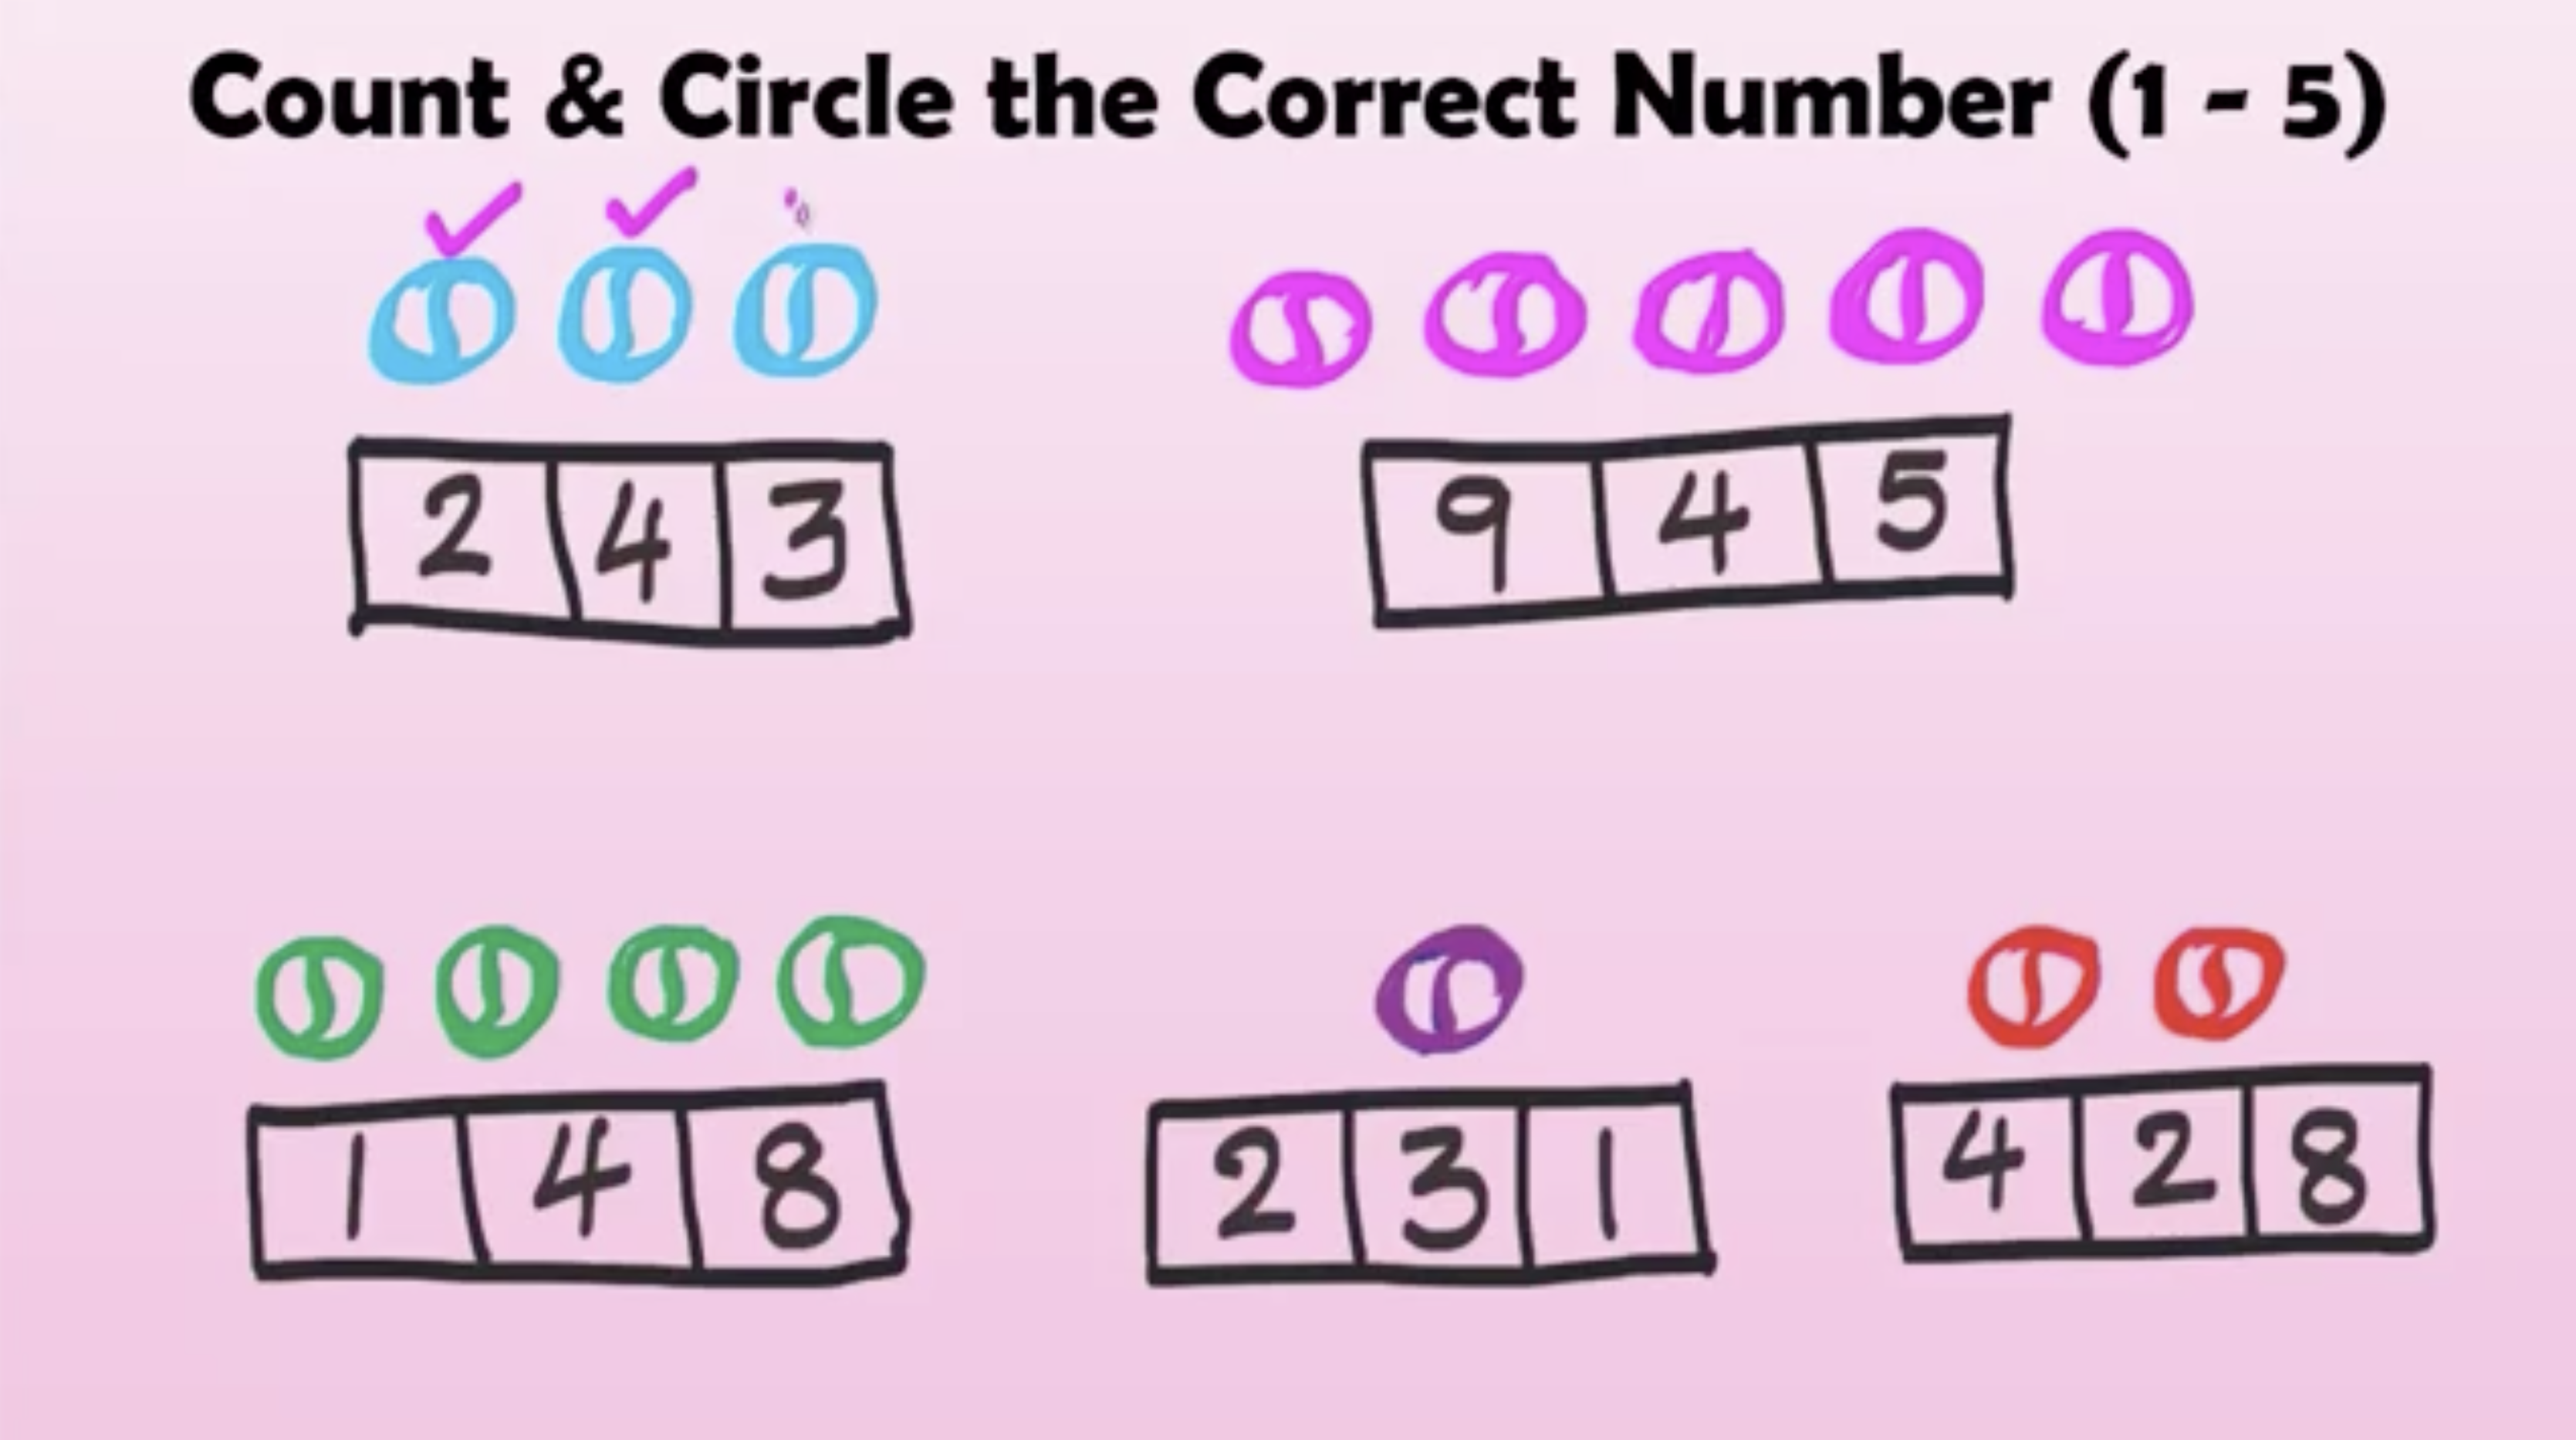 Match the circles to the correct number